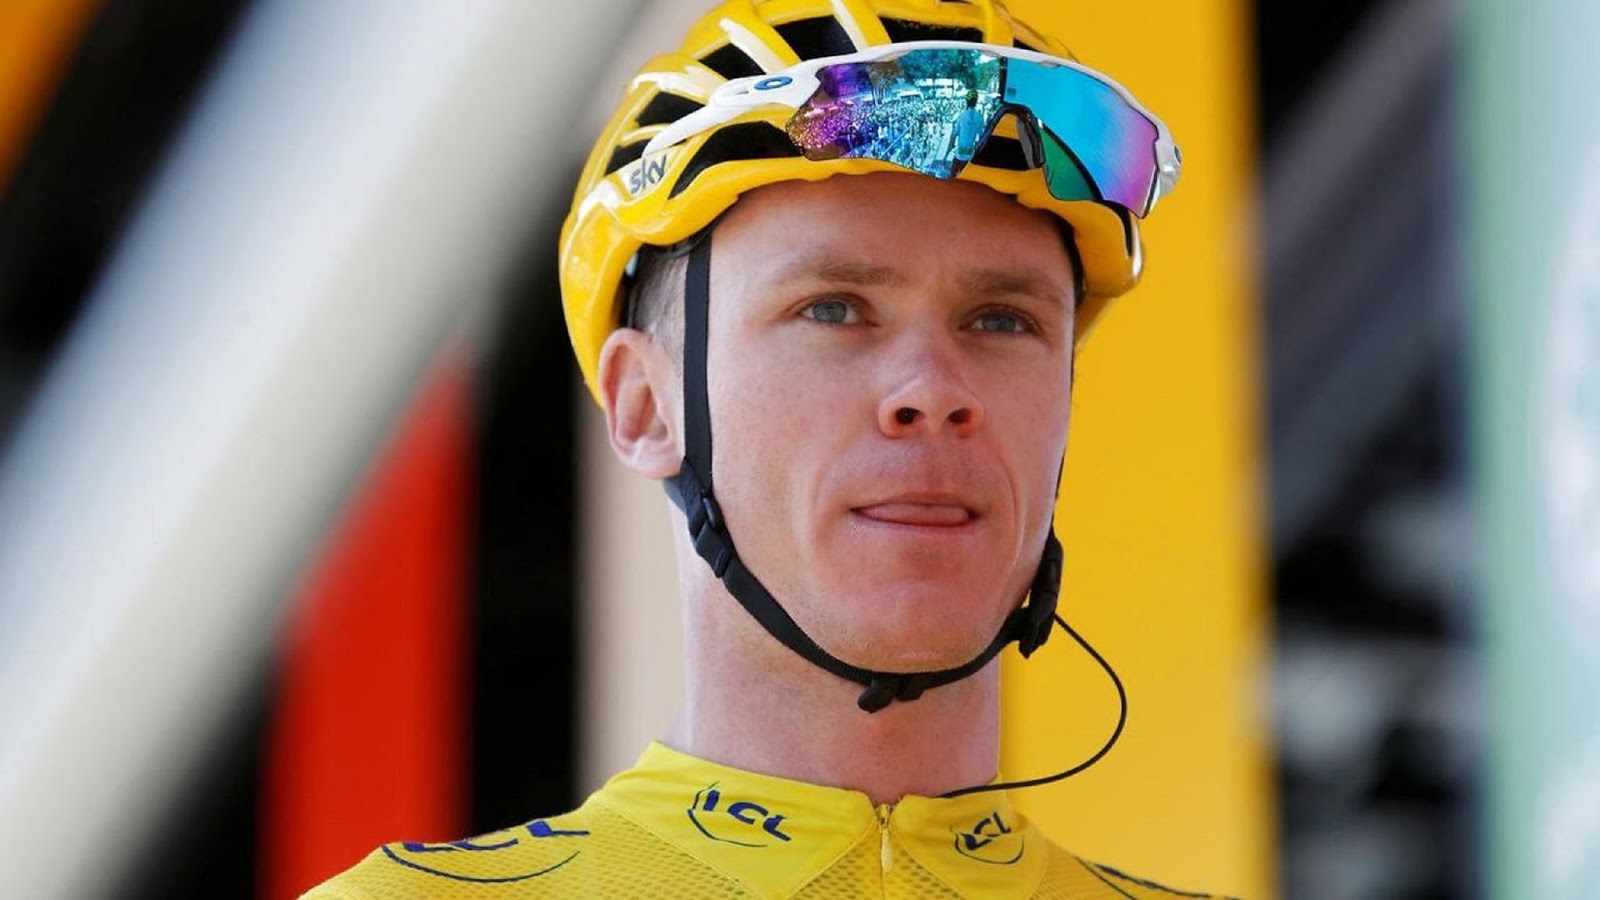 CHRIS FROOME 7